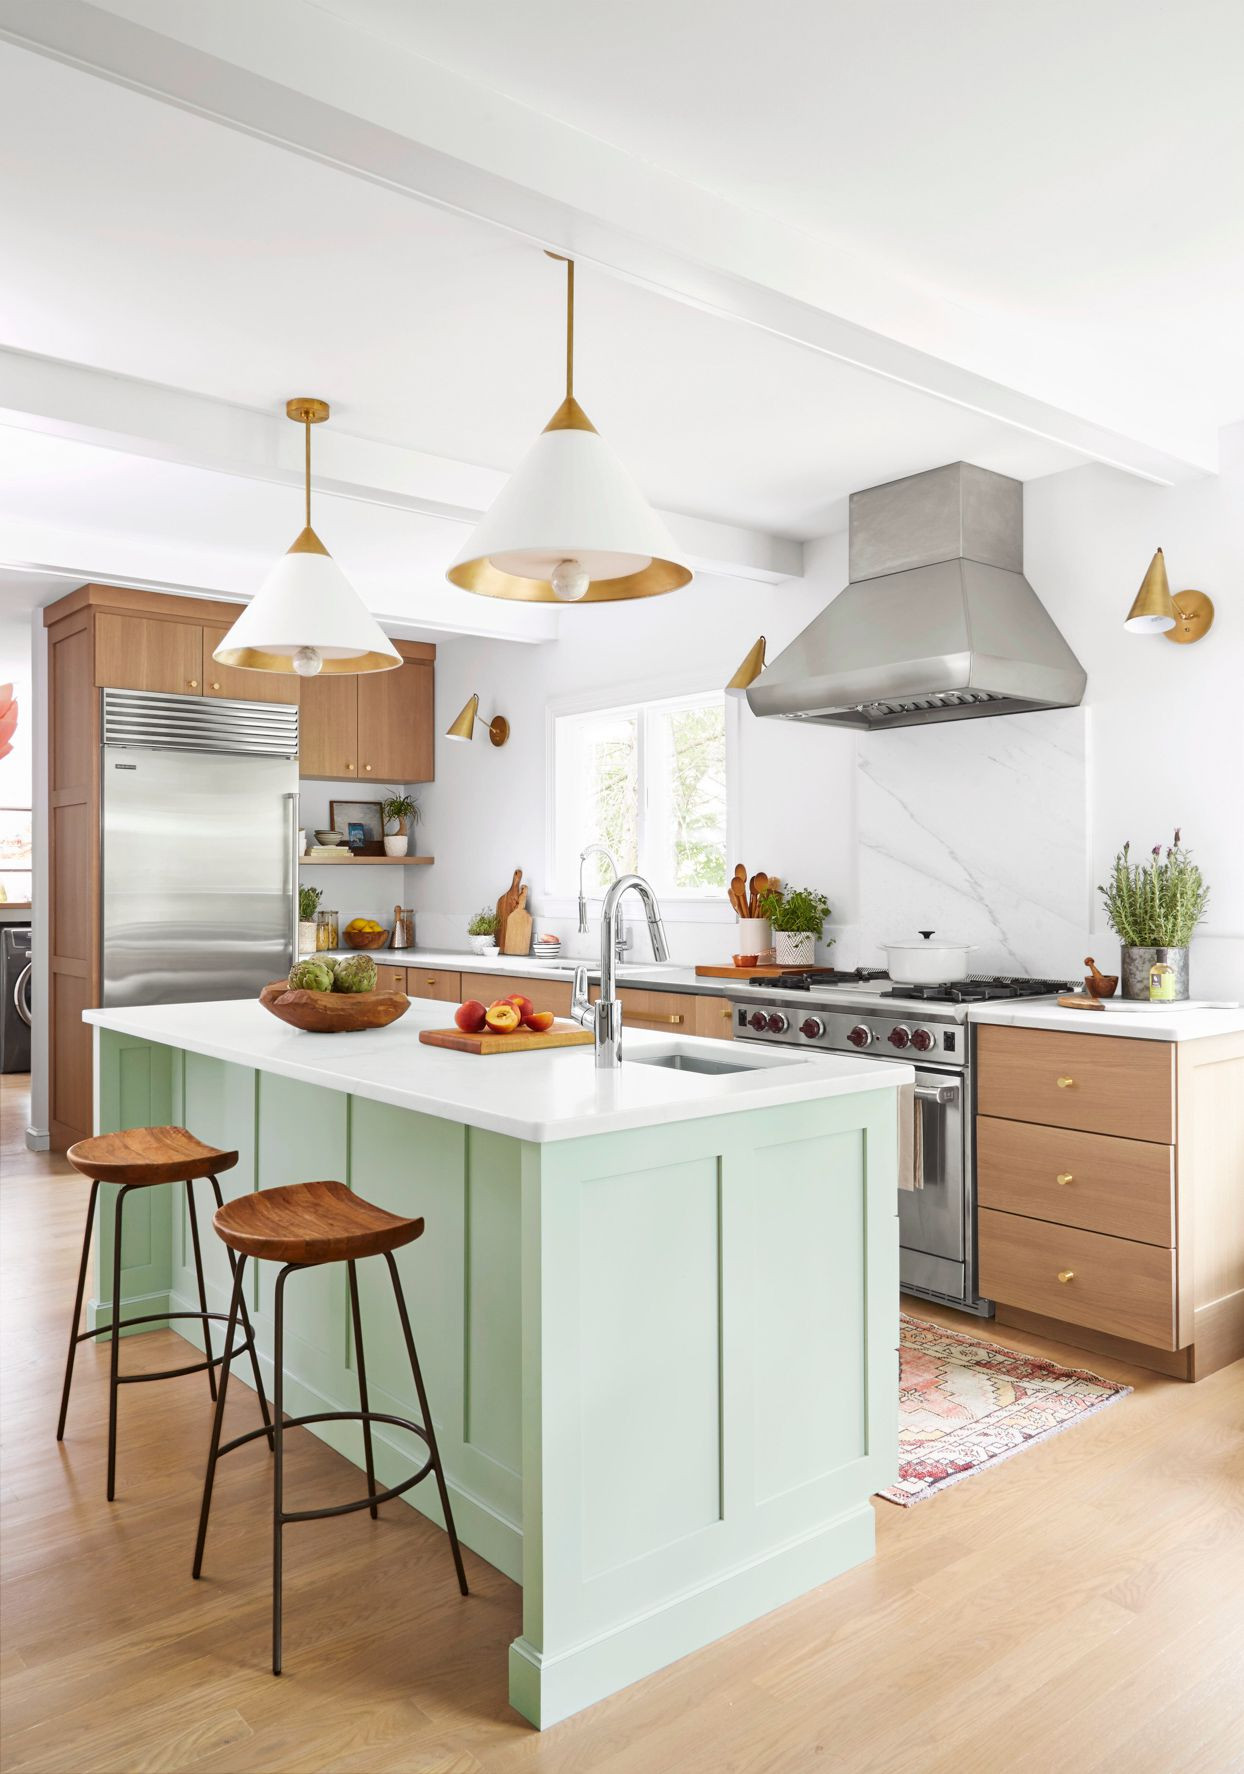 Kitchen Island Color Ideas for a Striking Accent